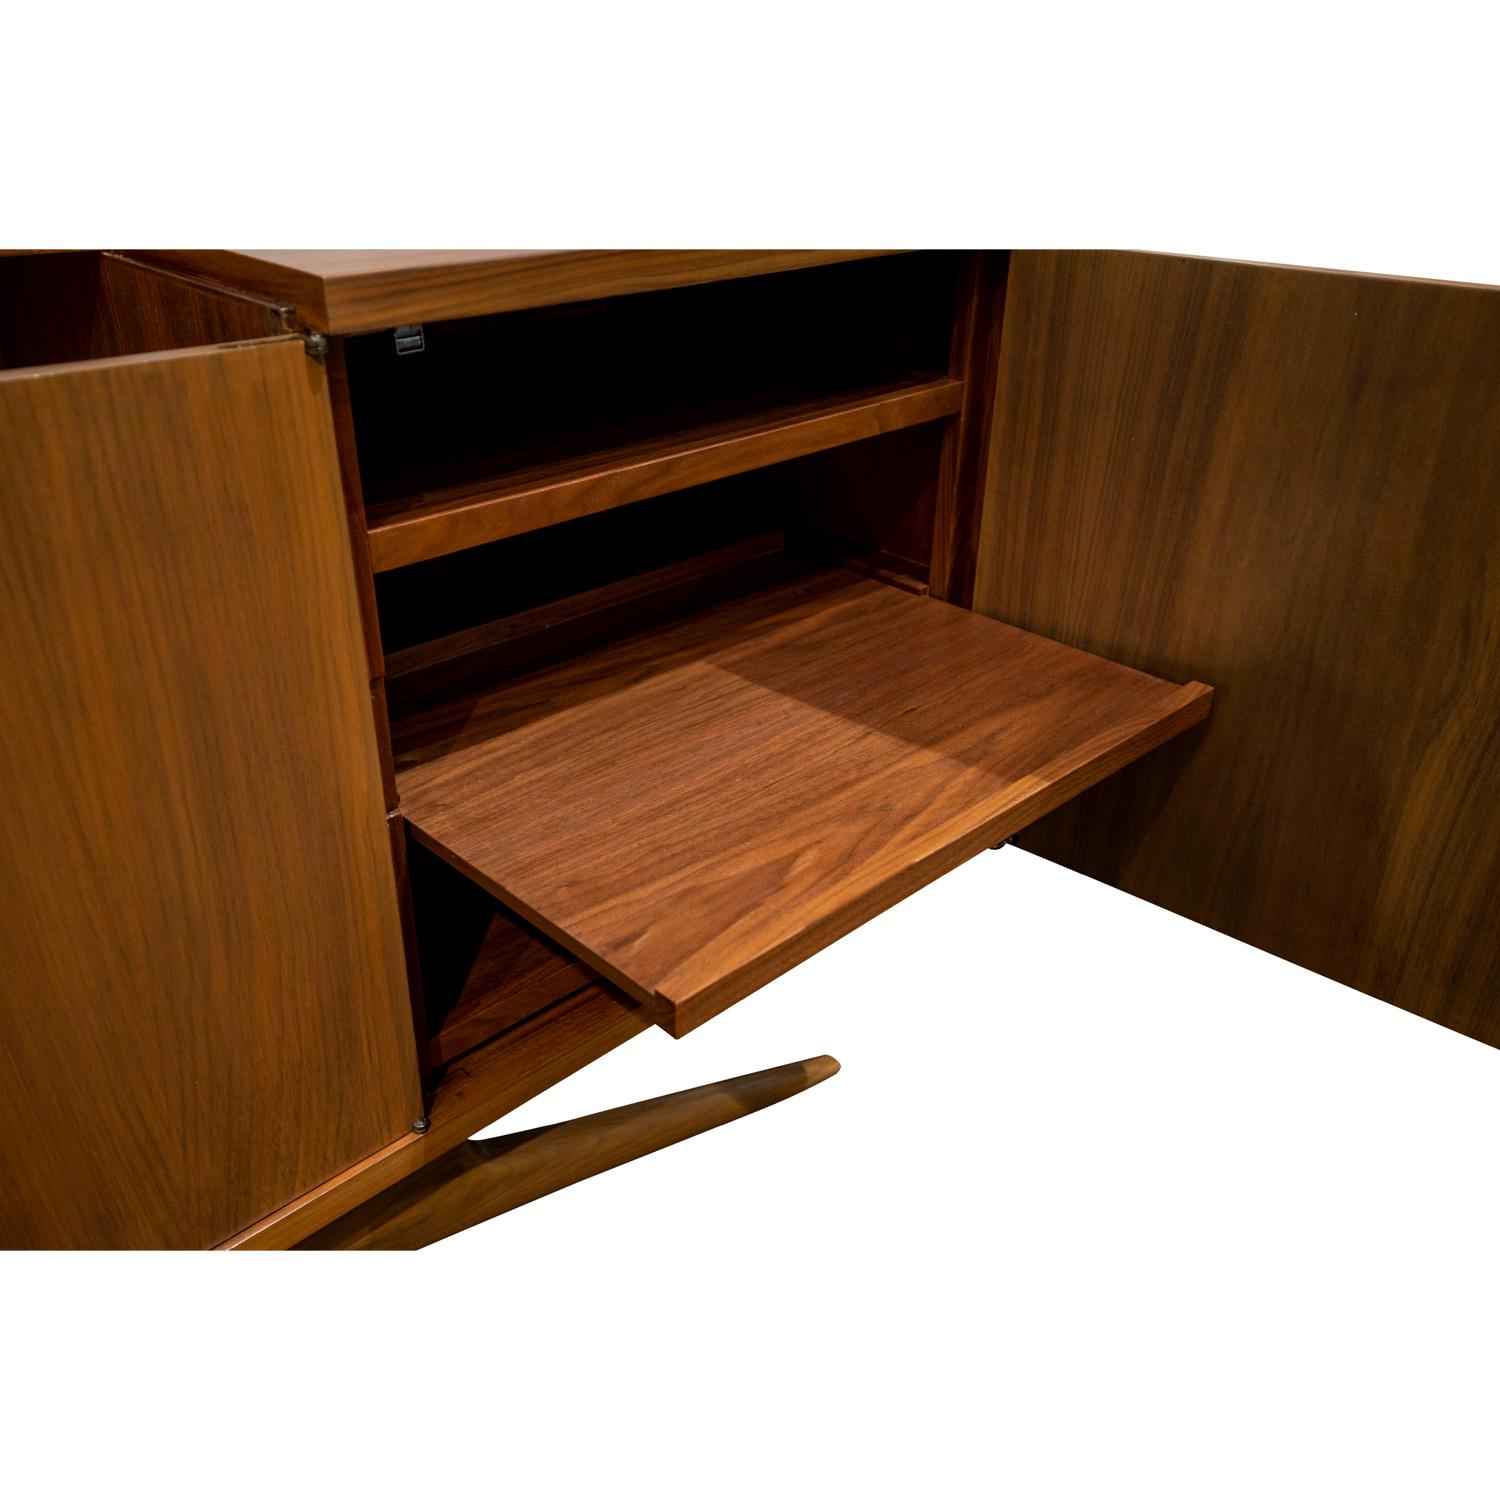 Vladimir Kagan One-of-a-Kind Credenza with Carved Center Panels 1940s (Signed) For Sale 2